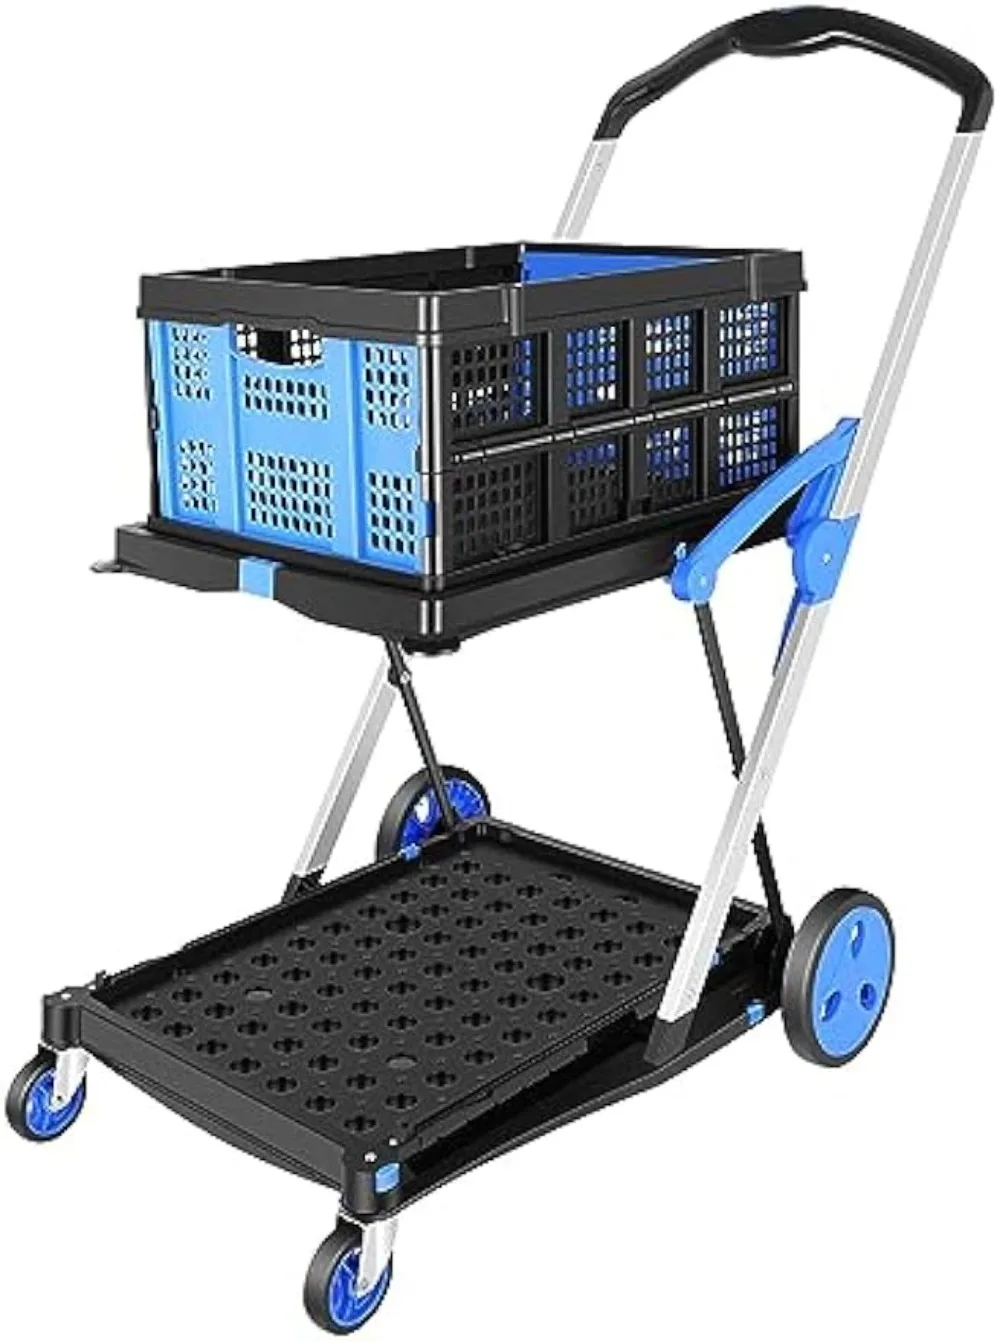 Collapsible-Utility-Cart-Multi-Use-Functional-Collapsible-Shopping-Carts-2-Tier-Collapsible-Shopping-Cart-with-Baskets